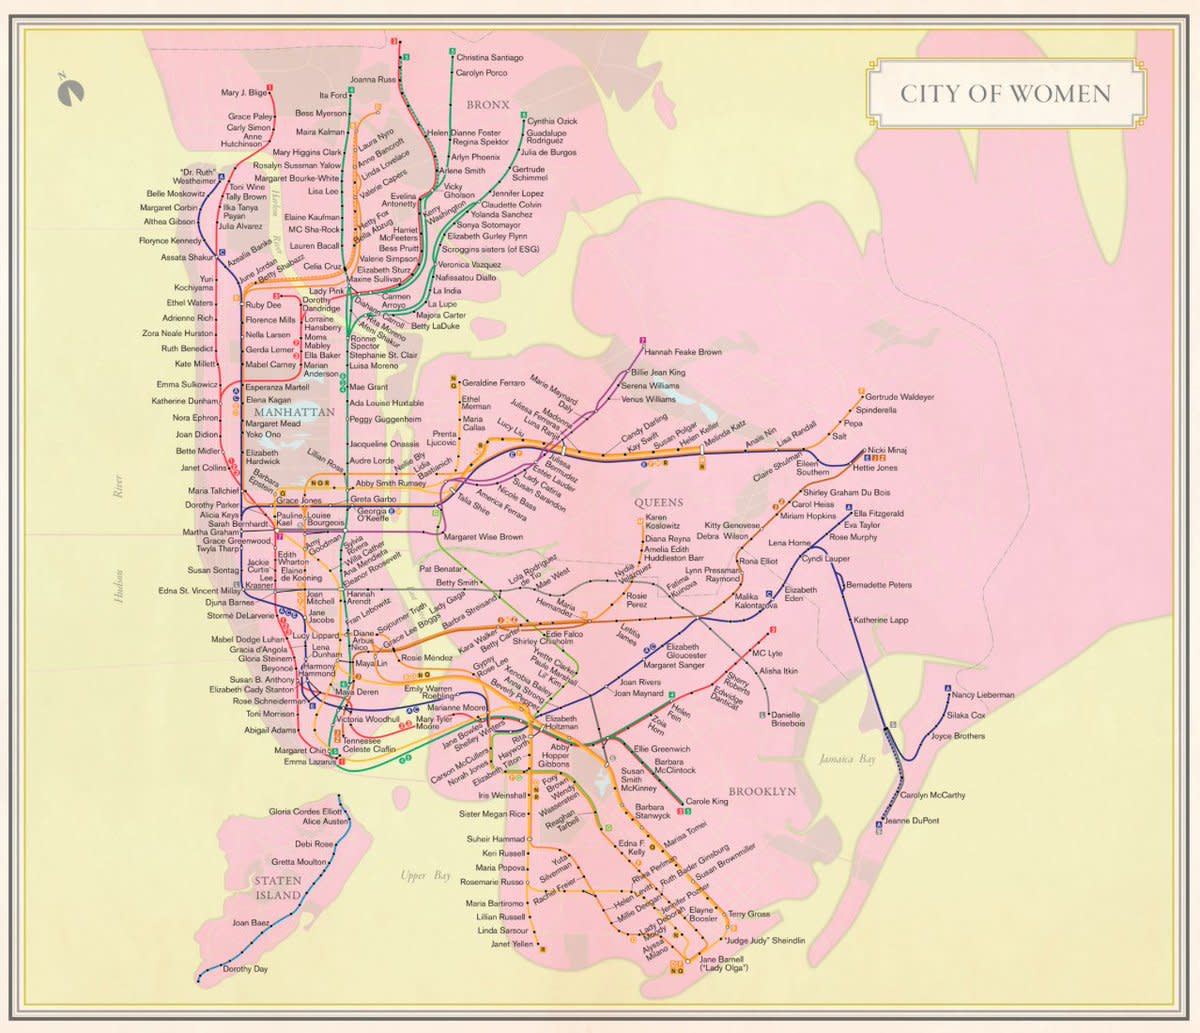 Check out the NYC subway map that pays homage to the city’s most accomplished women